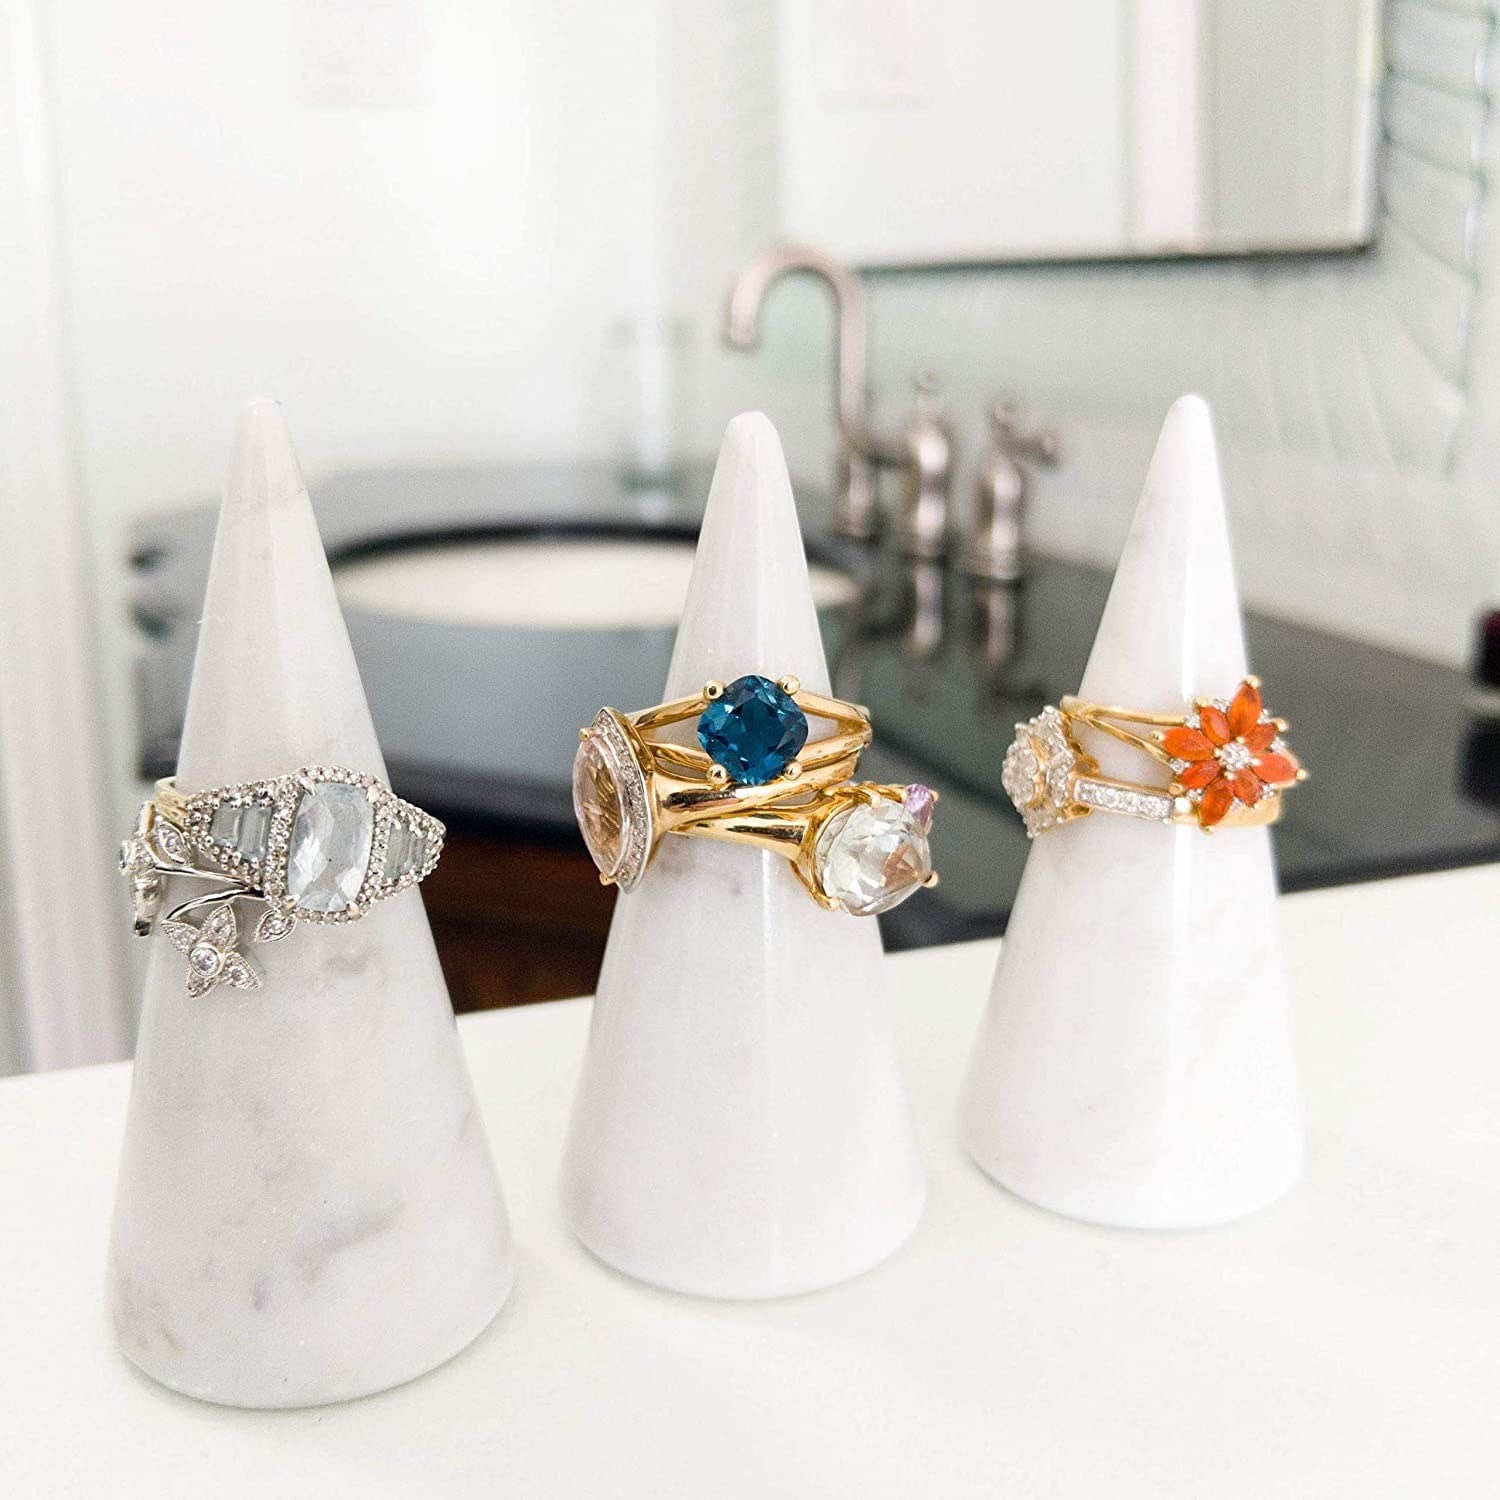 Buy Ring Holder Cone Online In India -  India